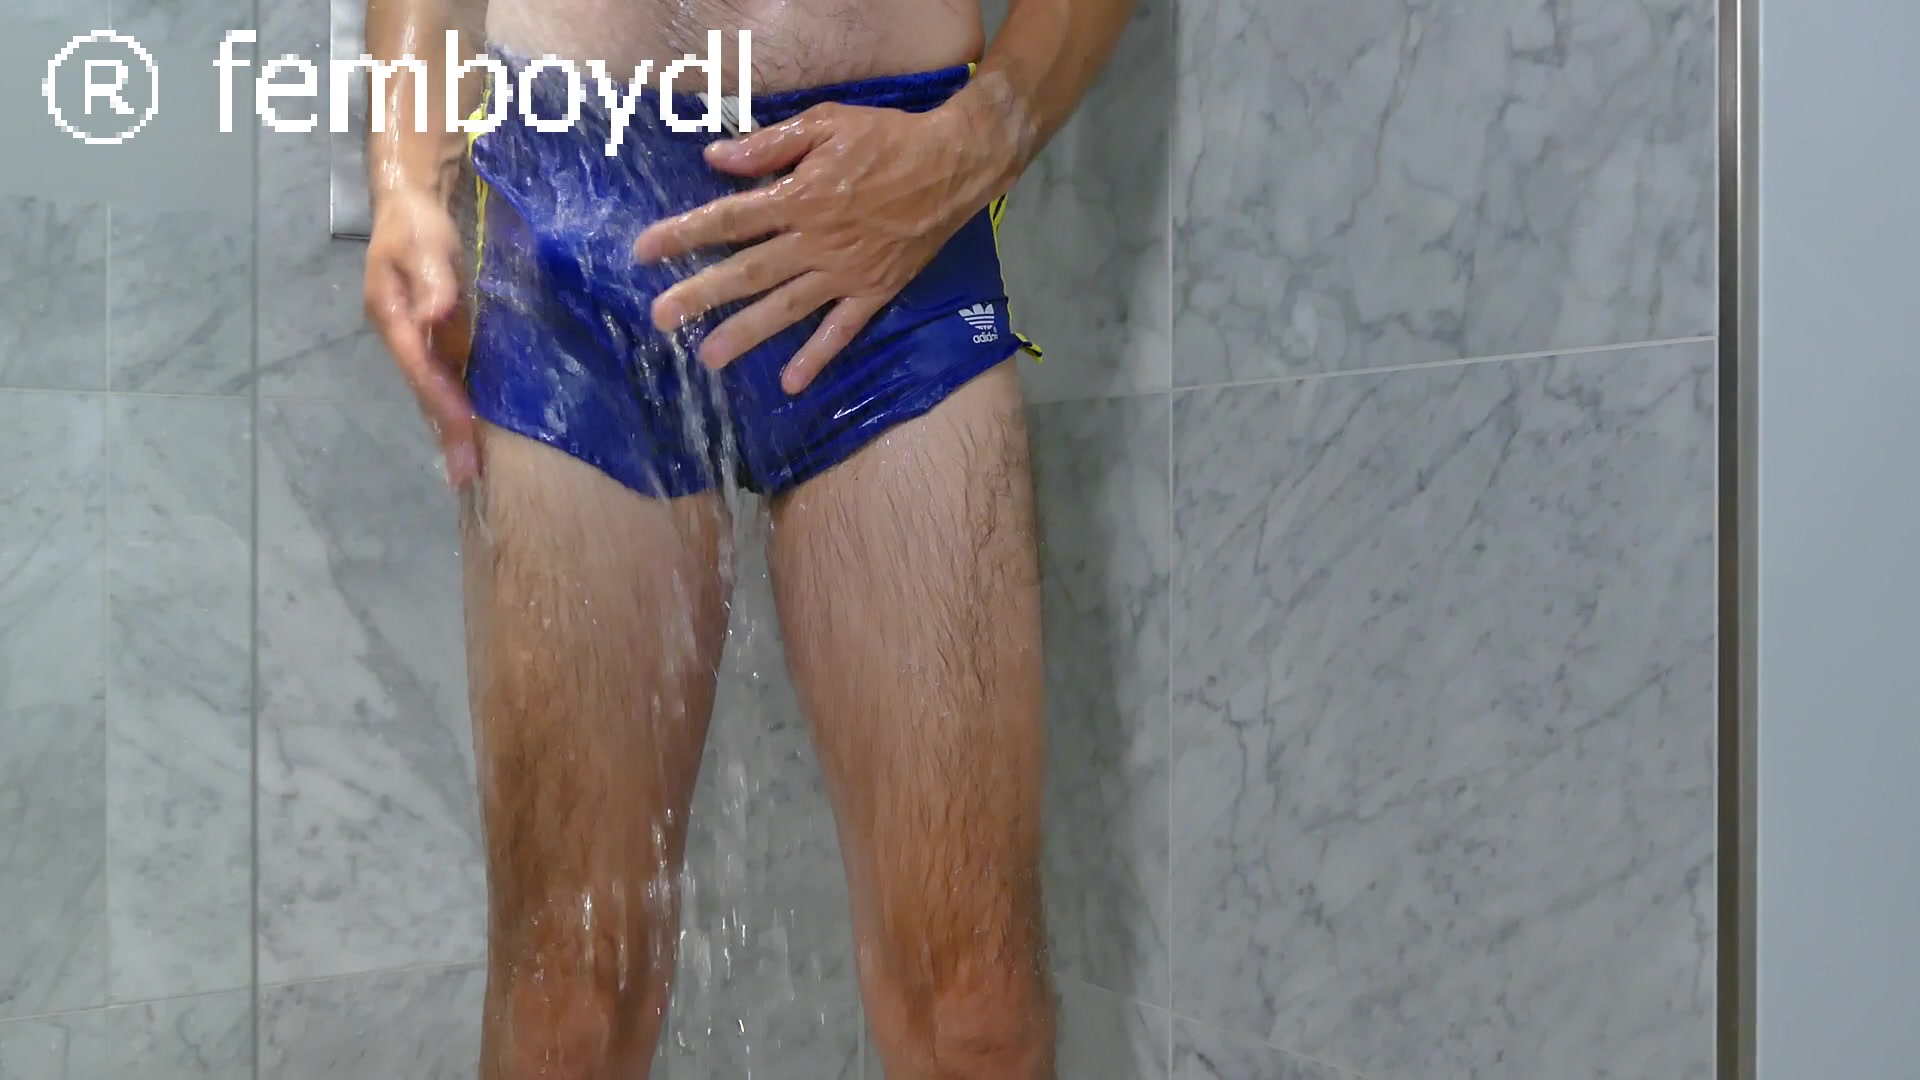 pee and jerk in shiny blue adidas nylon shorts in the shower